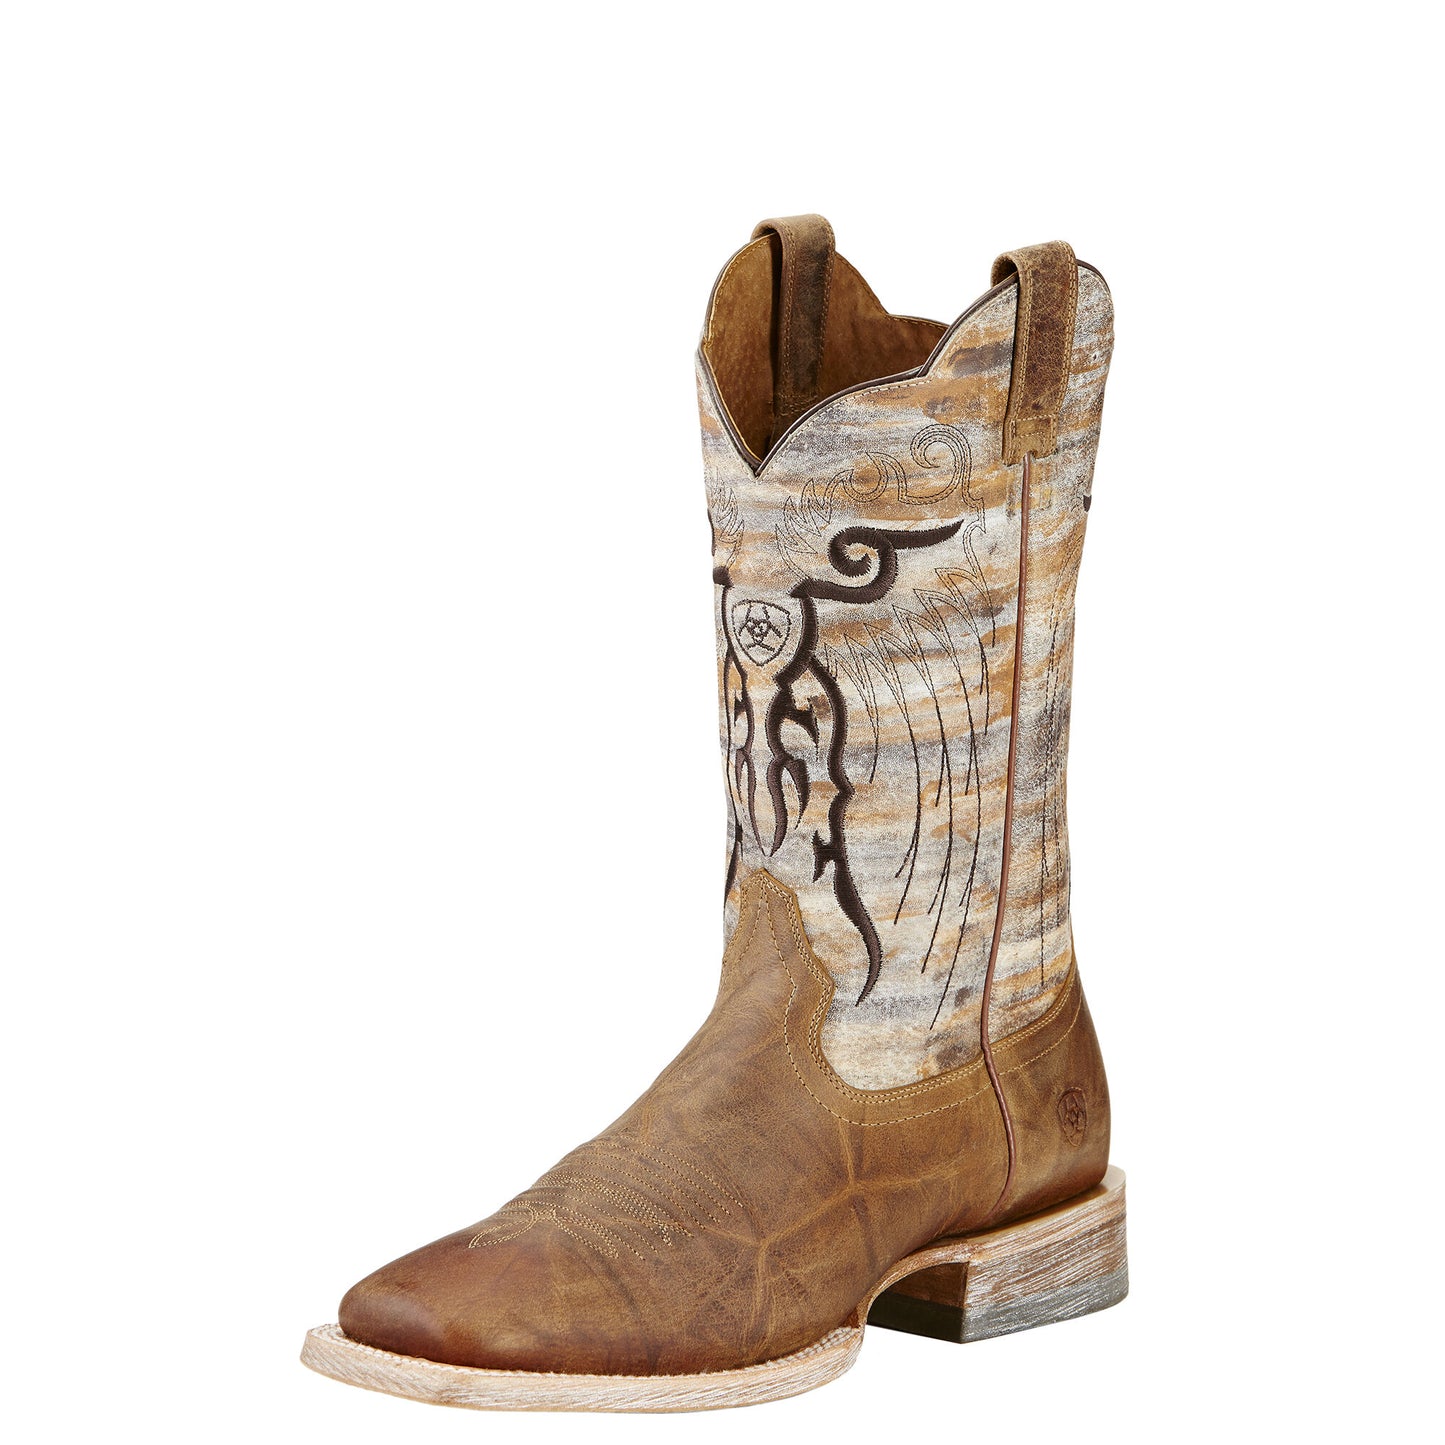 Ariat Men's Mesteno Boot - Dust Devil Tan/Marble - French's Boots